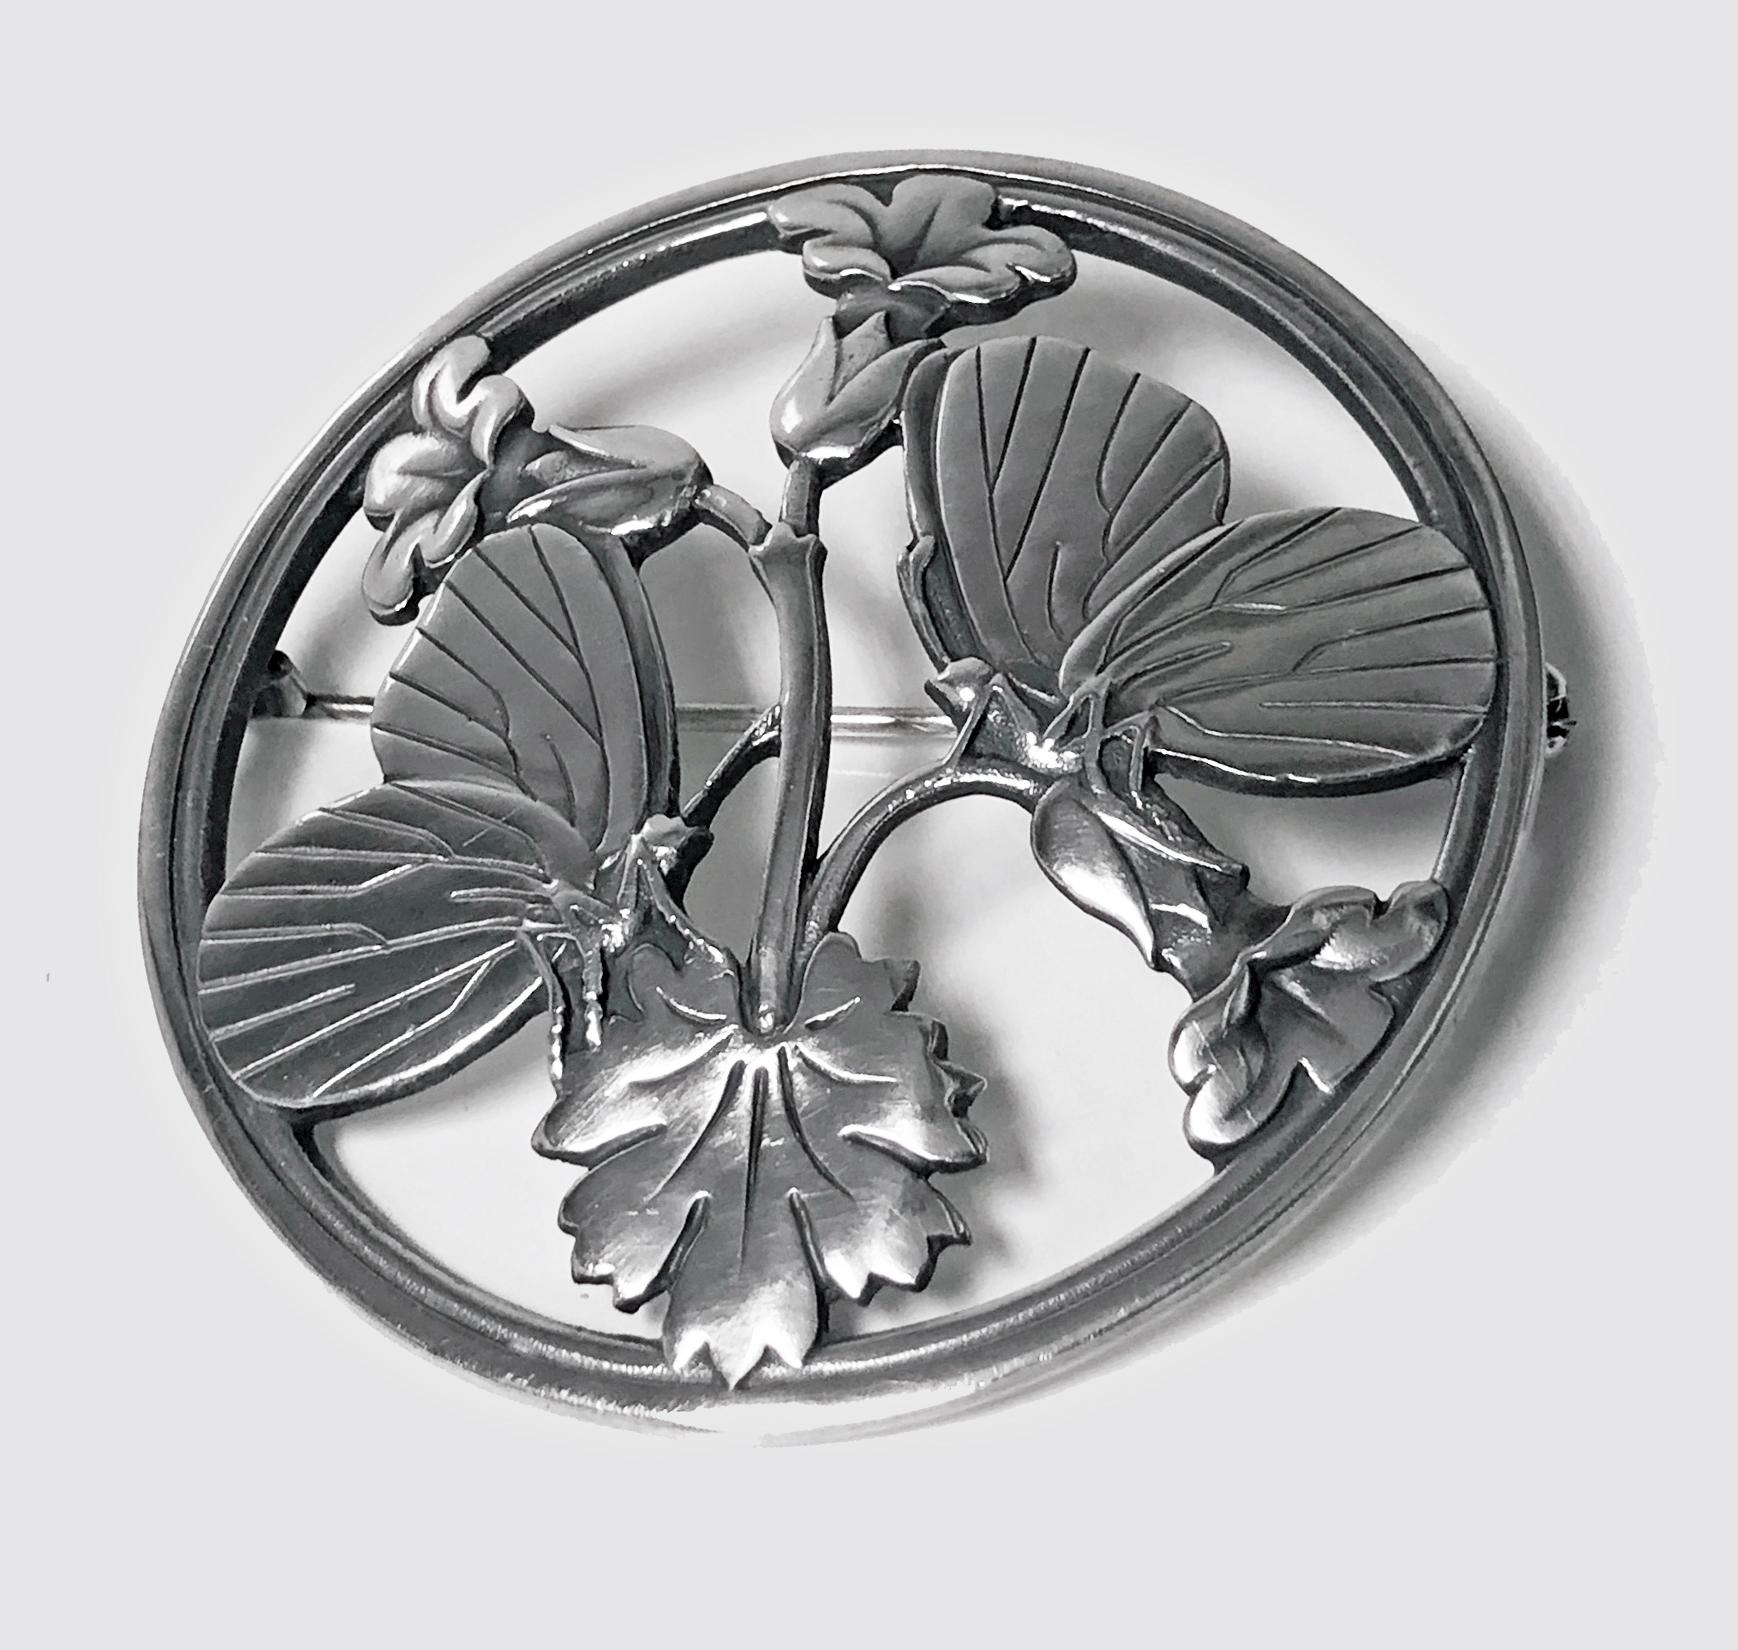 Georg Jensen Sterling Silver Butterfly and stylized Flowers Brooch, 20th century. Fully hallmarked Georg Jensen oval dotted punch, Sterling Denmark and design number 283, C.1950’s. Designed by Arno Malinowski for Georg Jensen. The brooch of circular